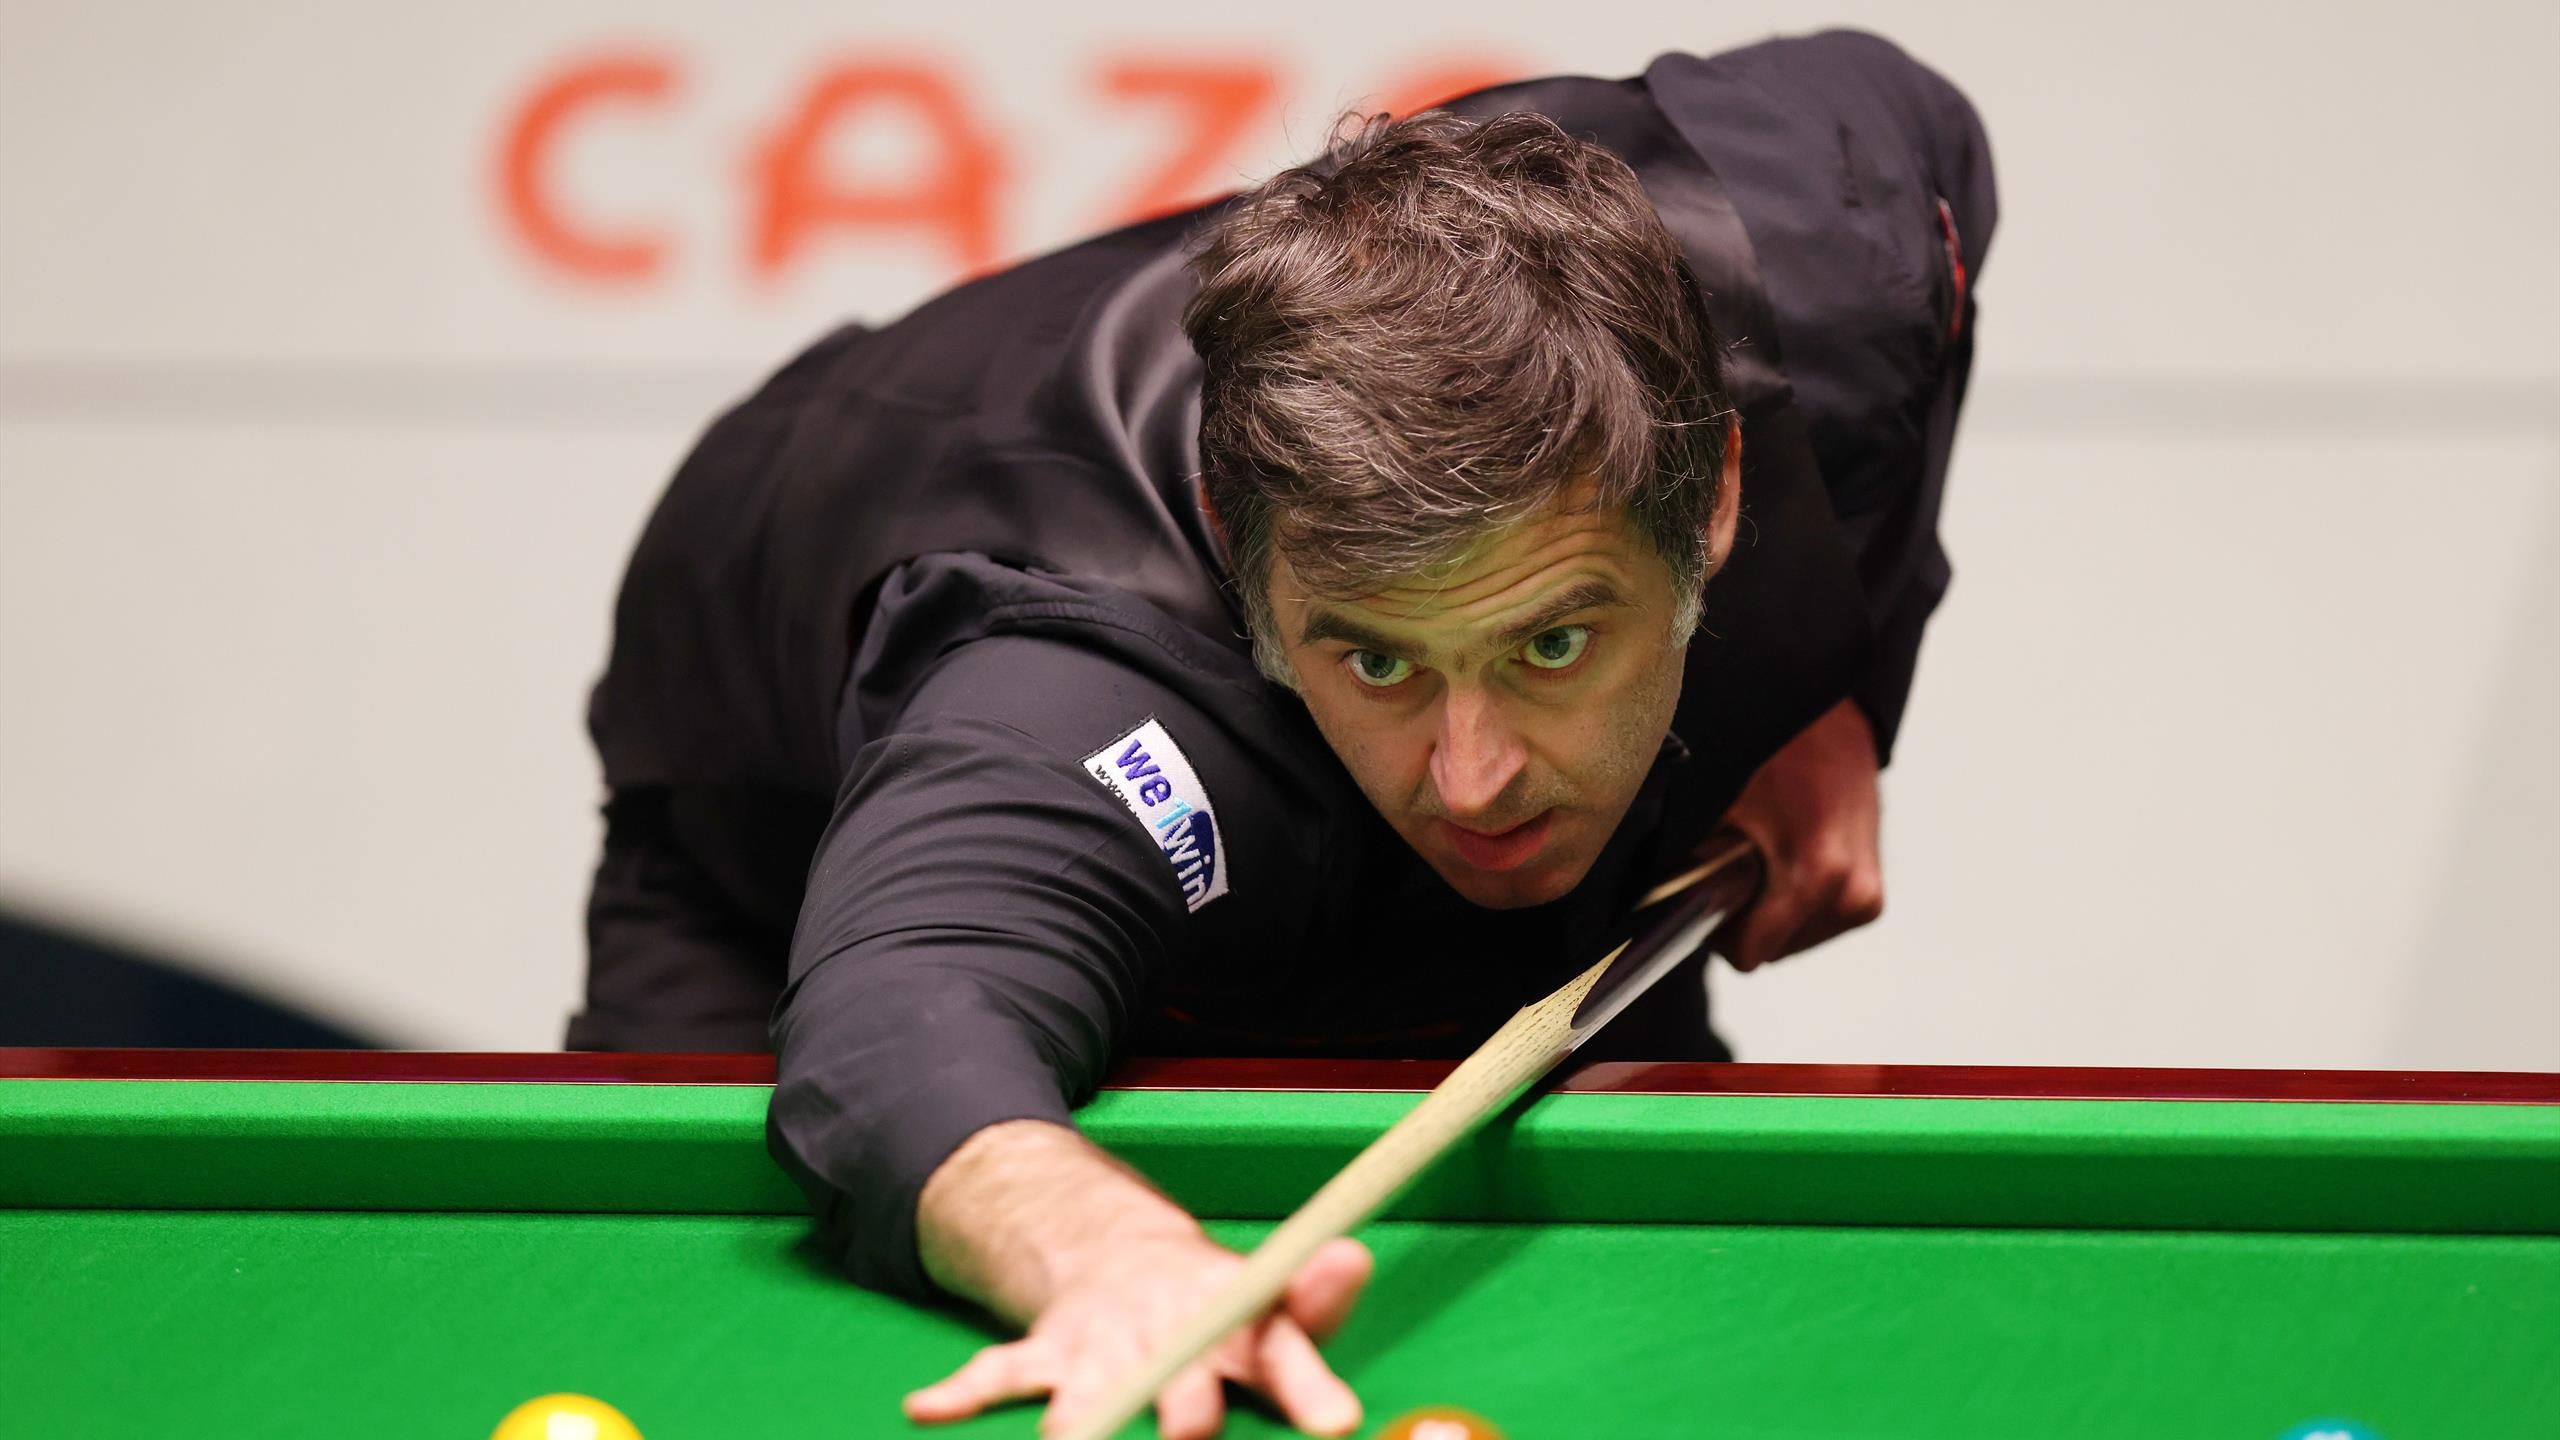 How to watch European Masters snooker 2023 Draw, schedule and live stream with Ronnie OSullivan in action